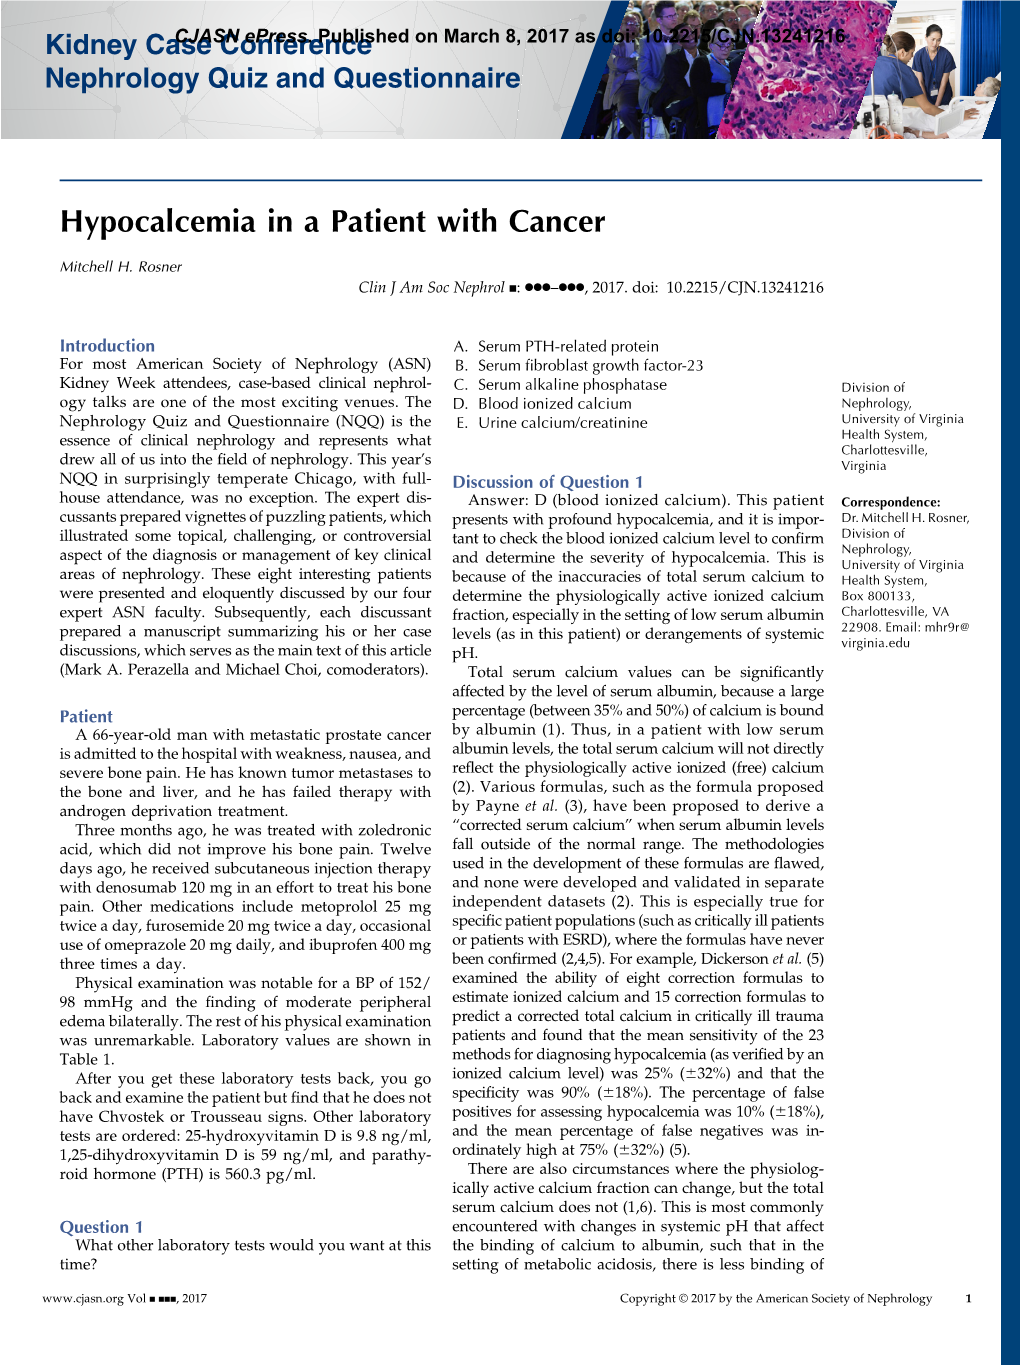 Hypocalcemia in a Patient with Cancer